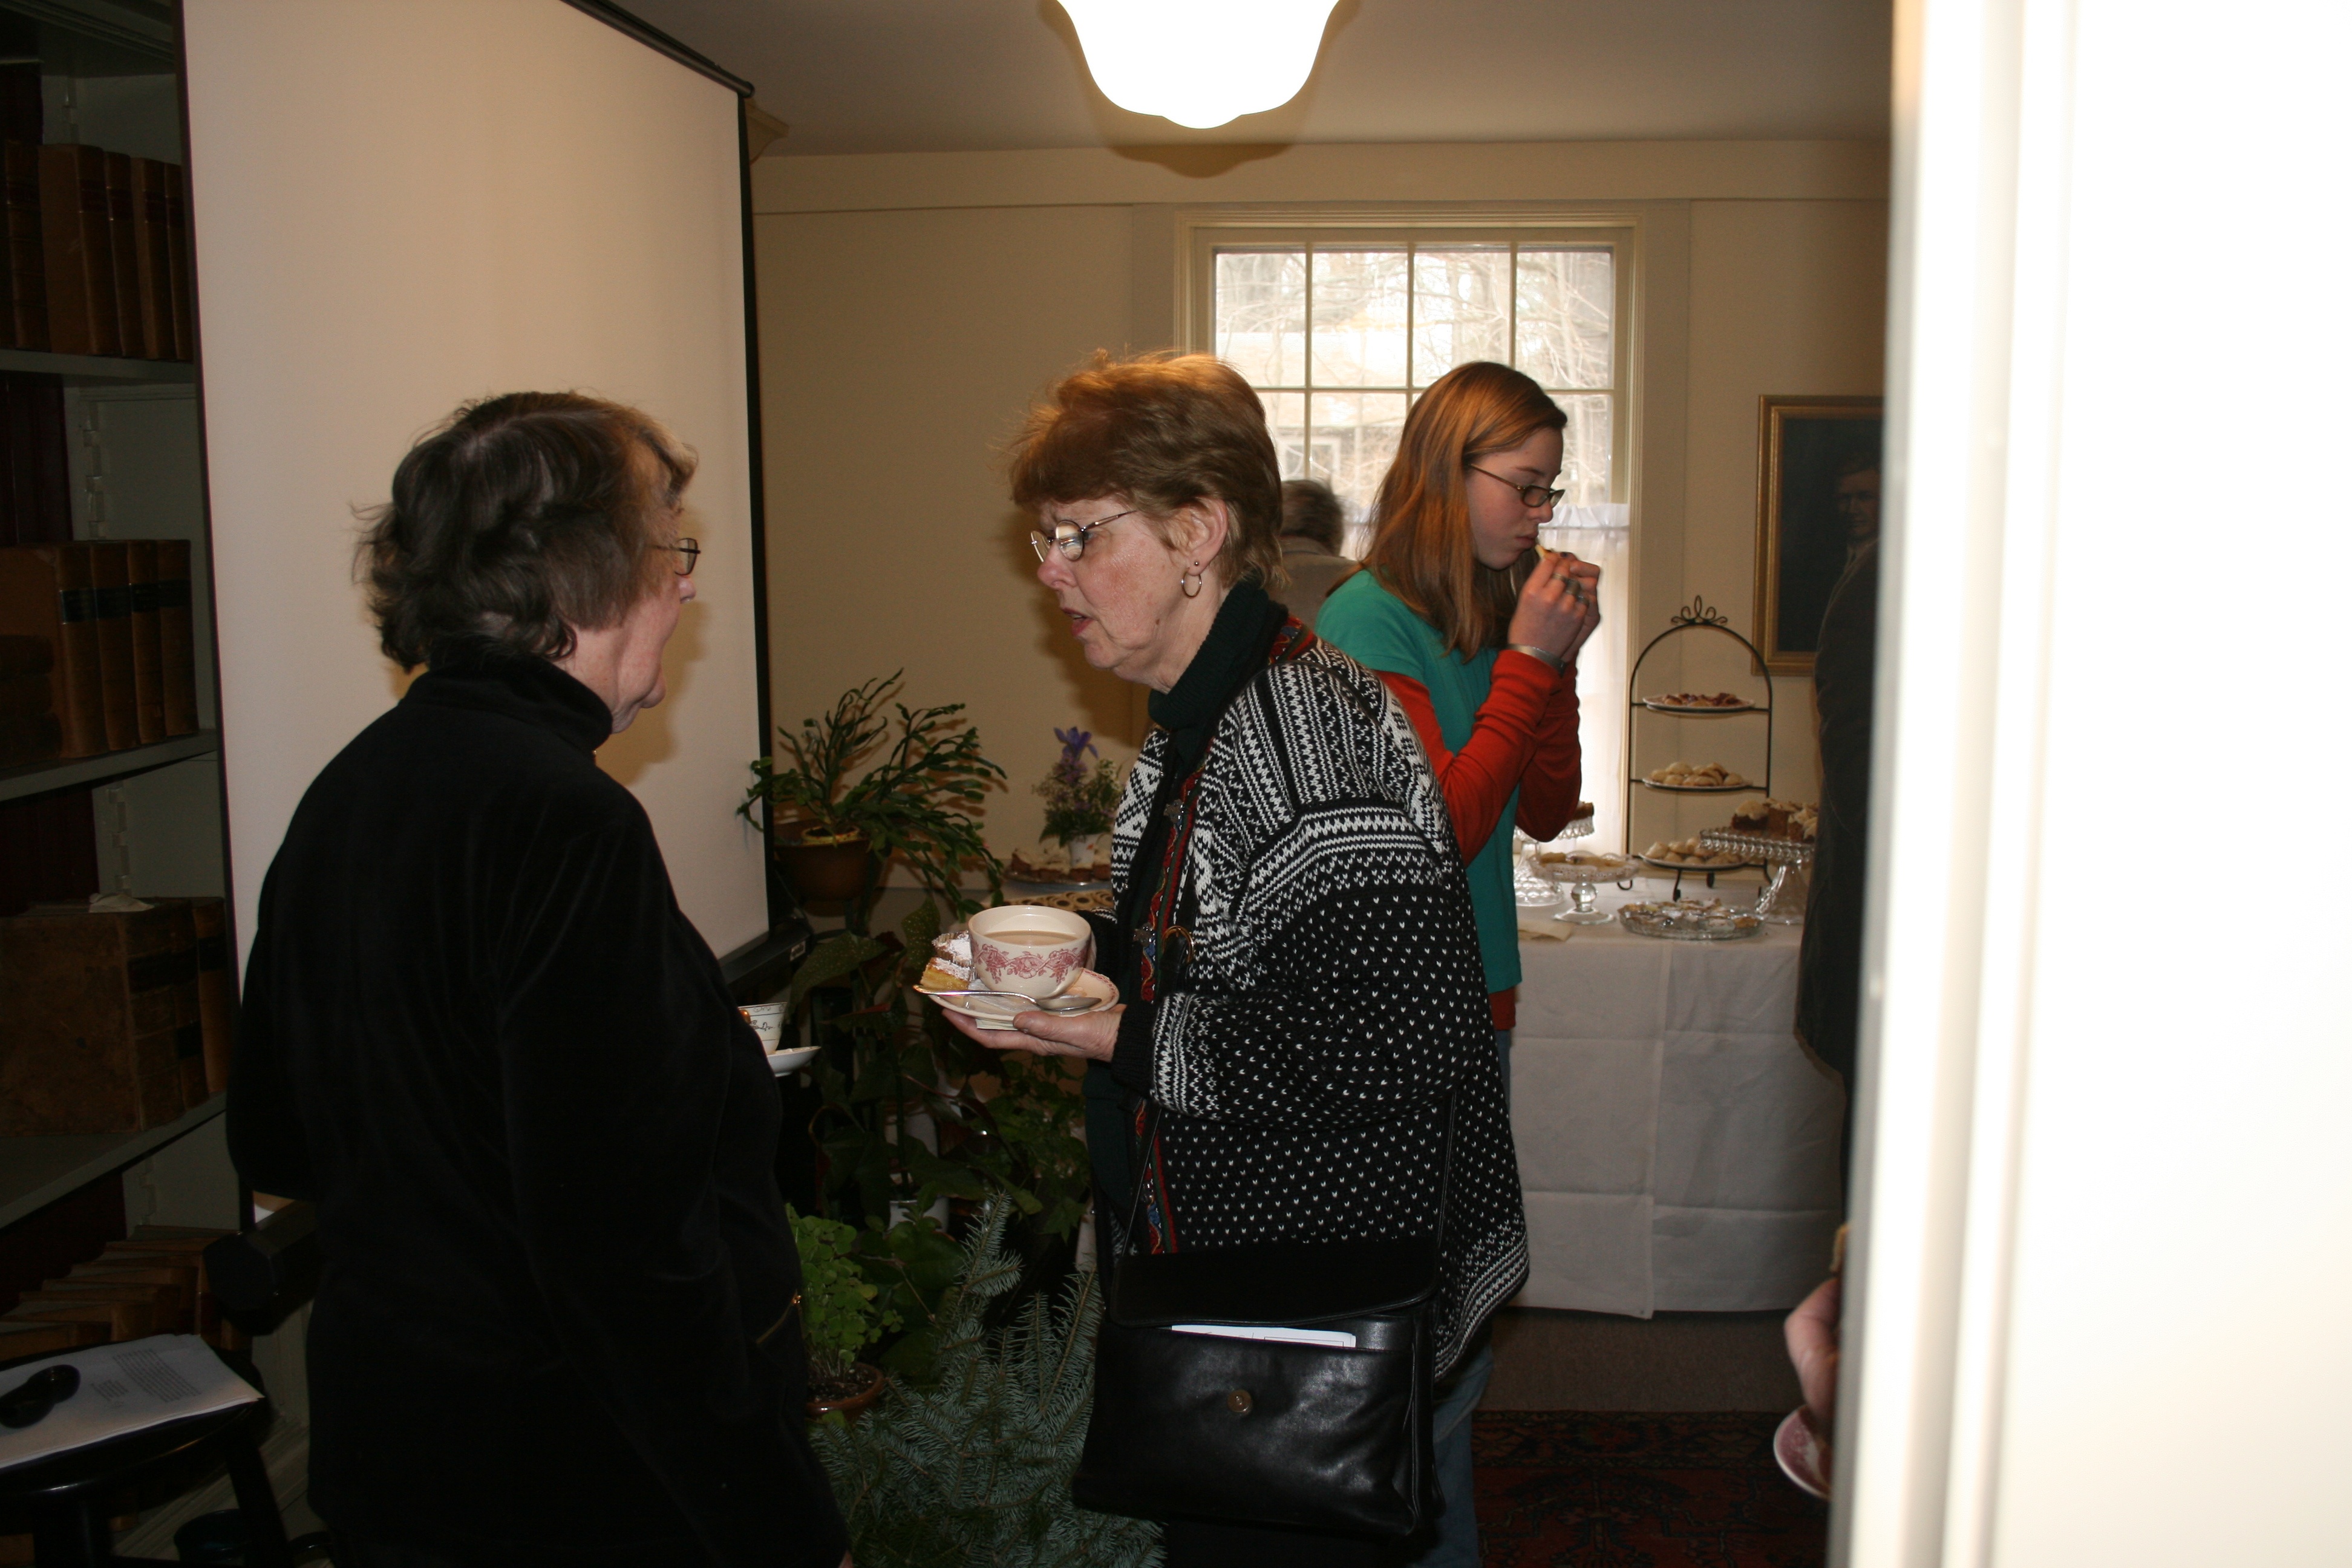 Members at an event